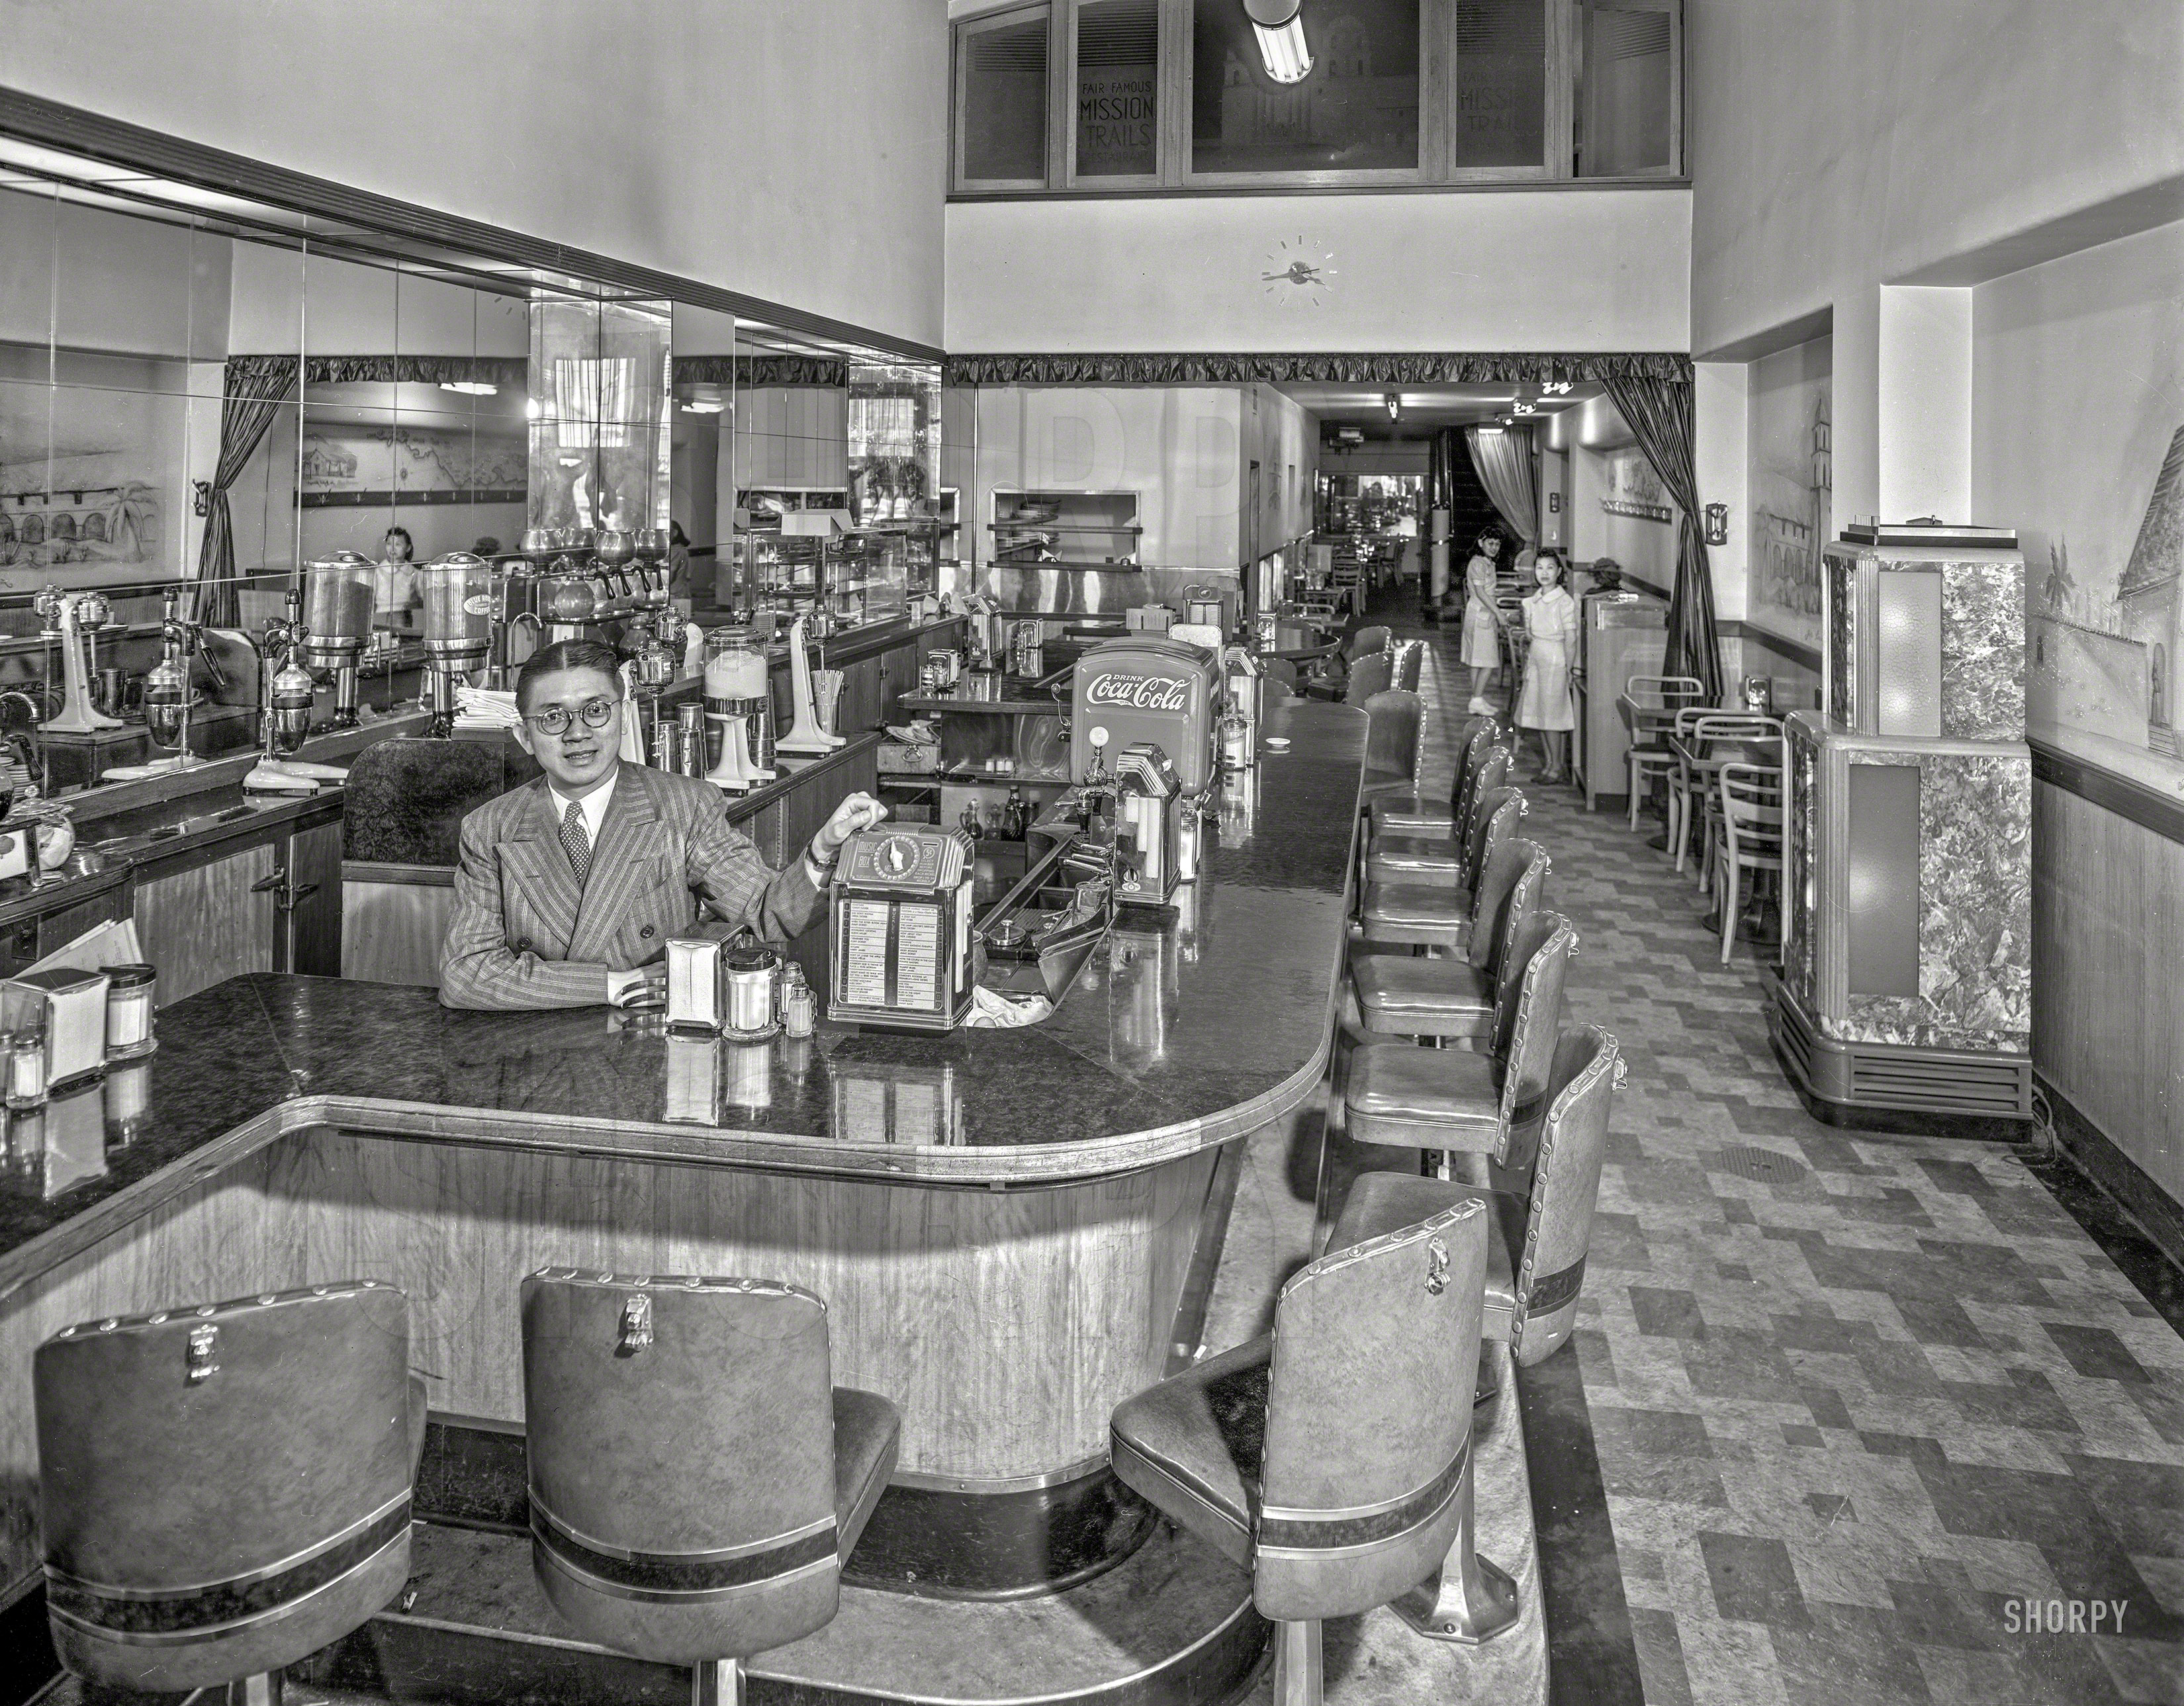 It's 1942 and we're back in San Francisco for another look at one of the many fine establishments made even finer by the installation of Buckley Music System's "Music Box." The eatery is Andy Wong's "Fair Famous" Mission Trails Restaurant, Harvey Lum, manager, at 500 Sutter Street. Close your eyes and you can practically hear Padre tolling the mission bell while the brothers pound out their tortillas. 8x10 inch acetate negative, photographer unknown. View full size.